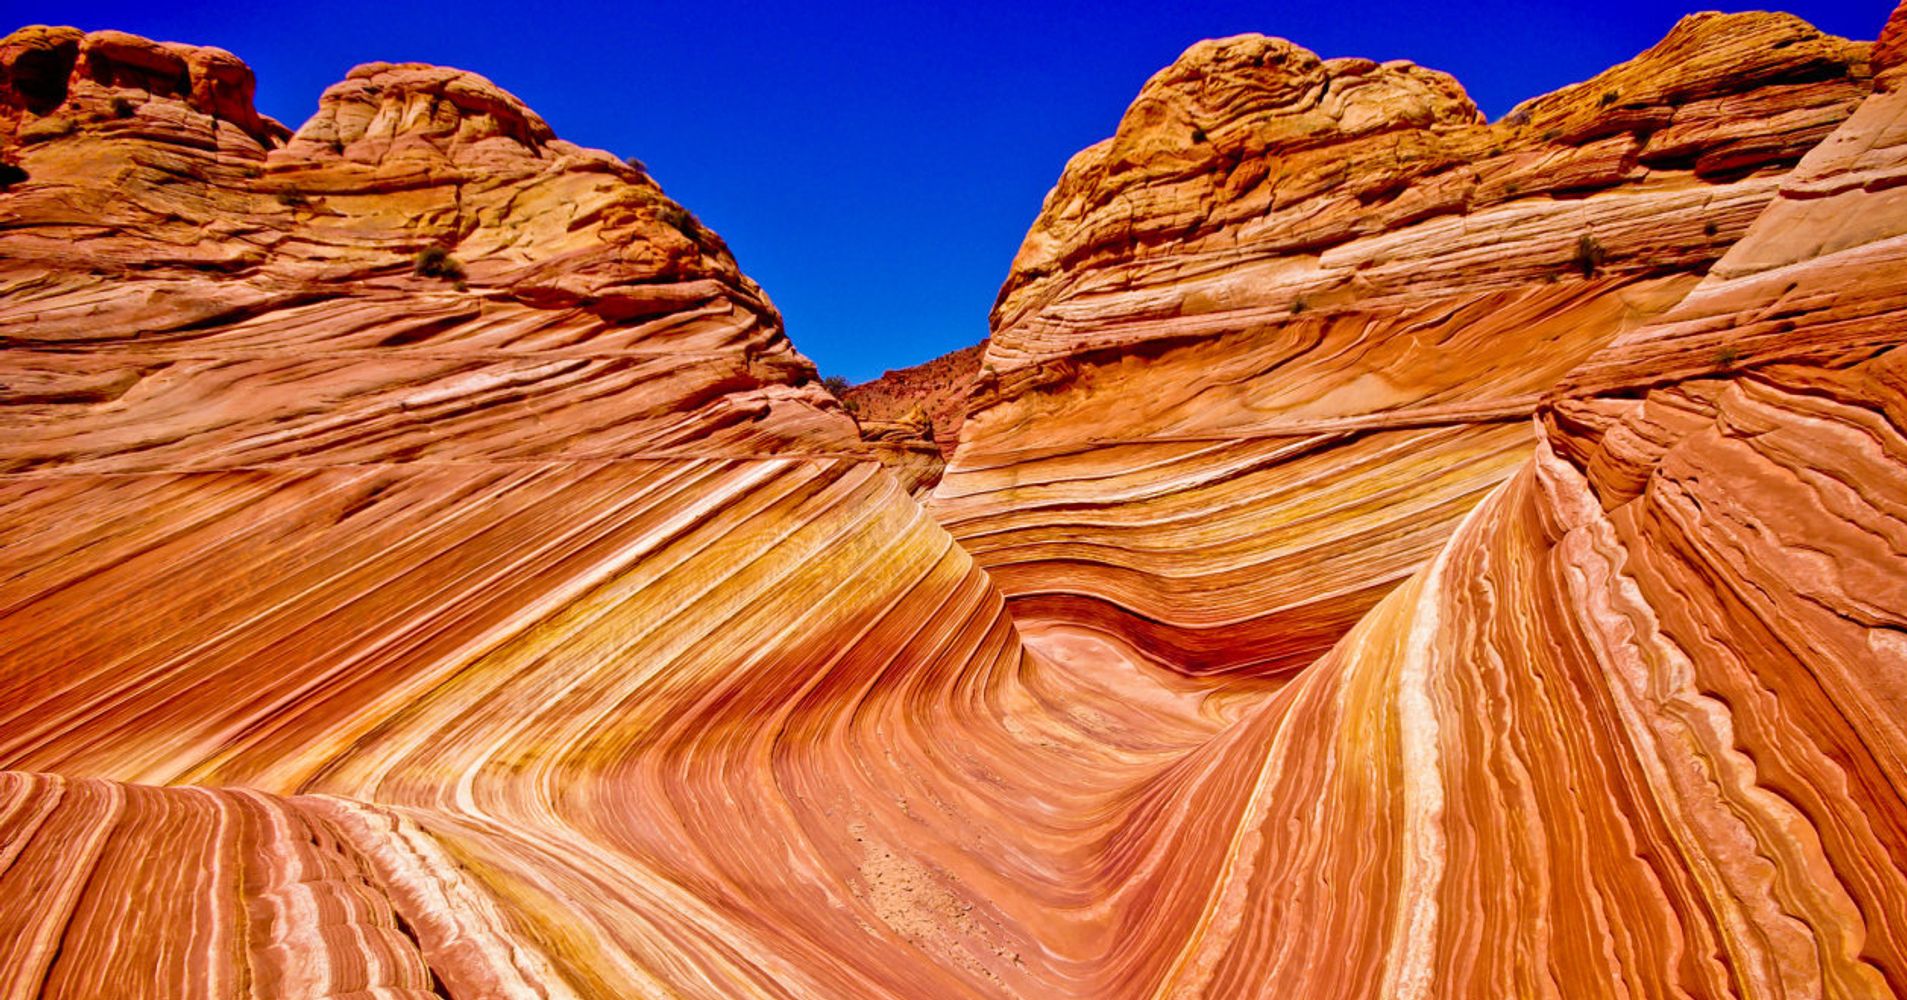 13 Stunning U.S. National Monuments You Didn't Know You Needed To See